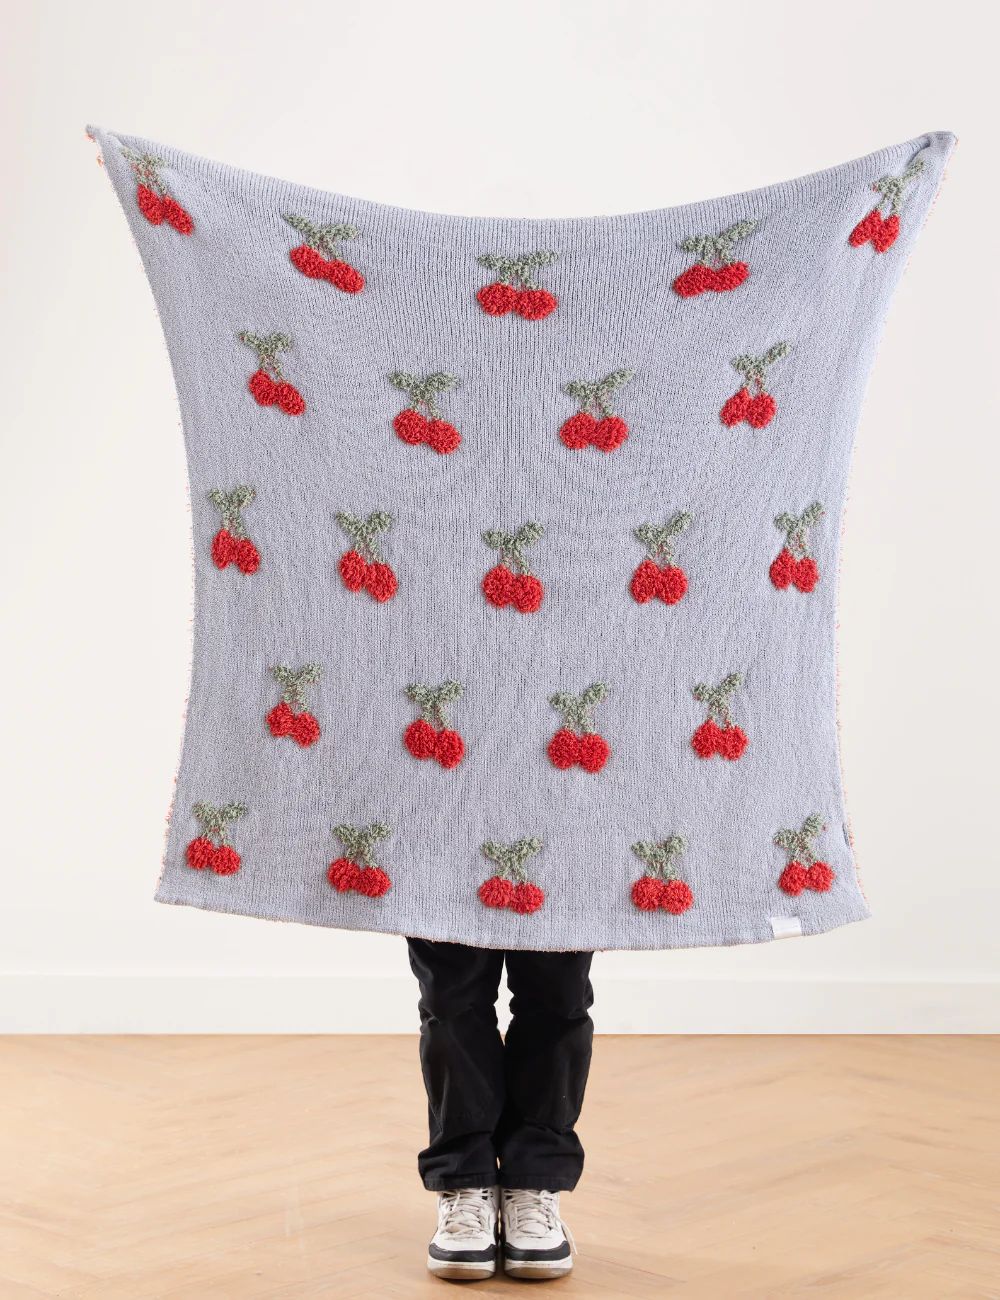 Cherries Buttery Blanket - Receiving | The Styled Collection